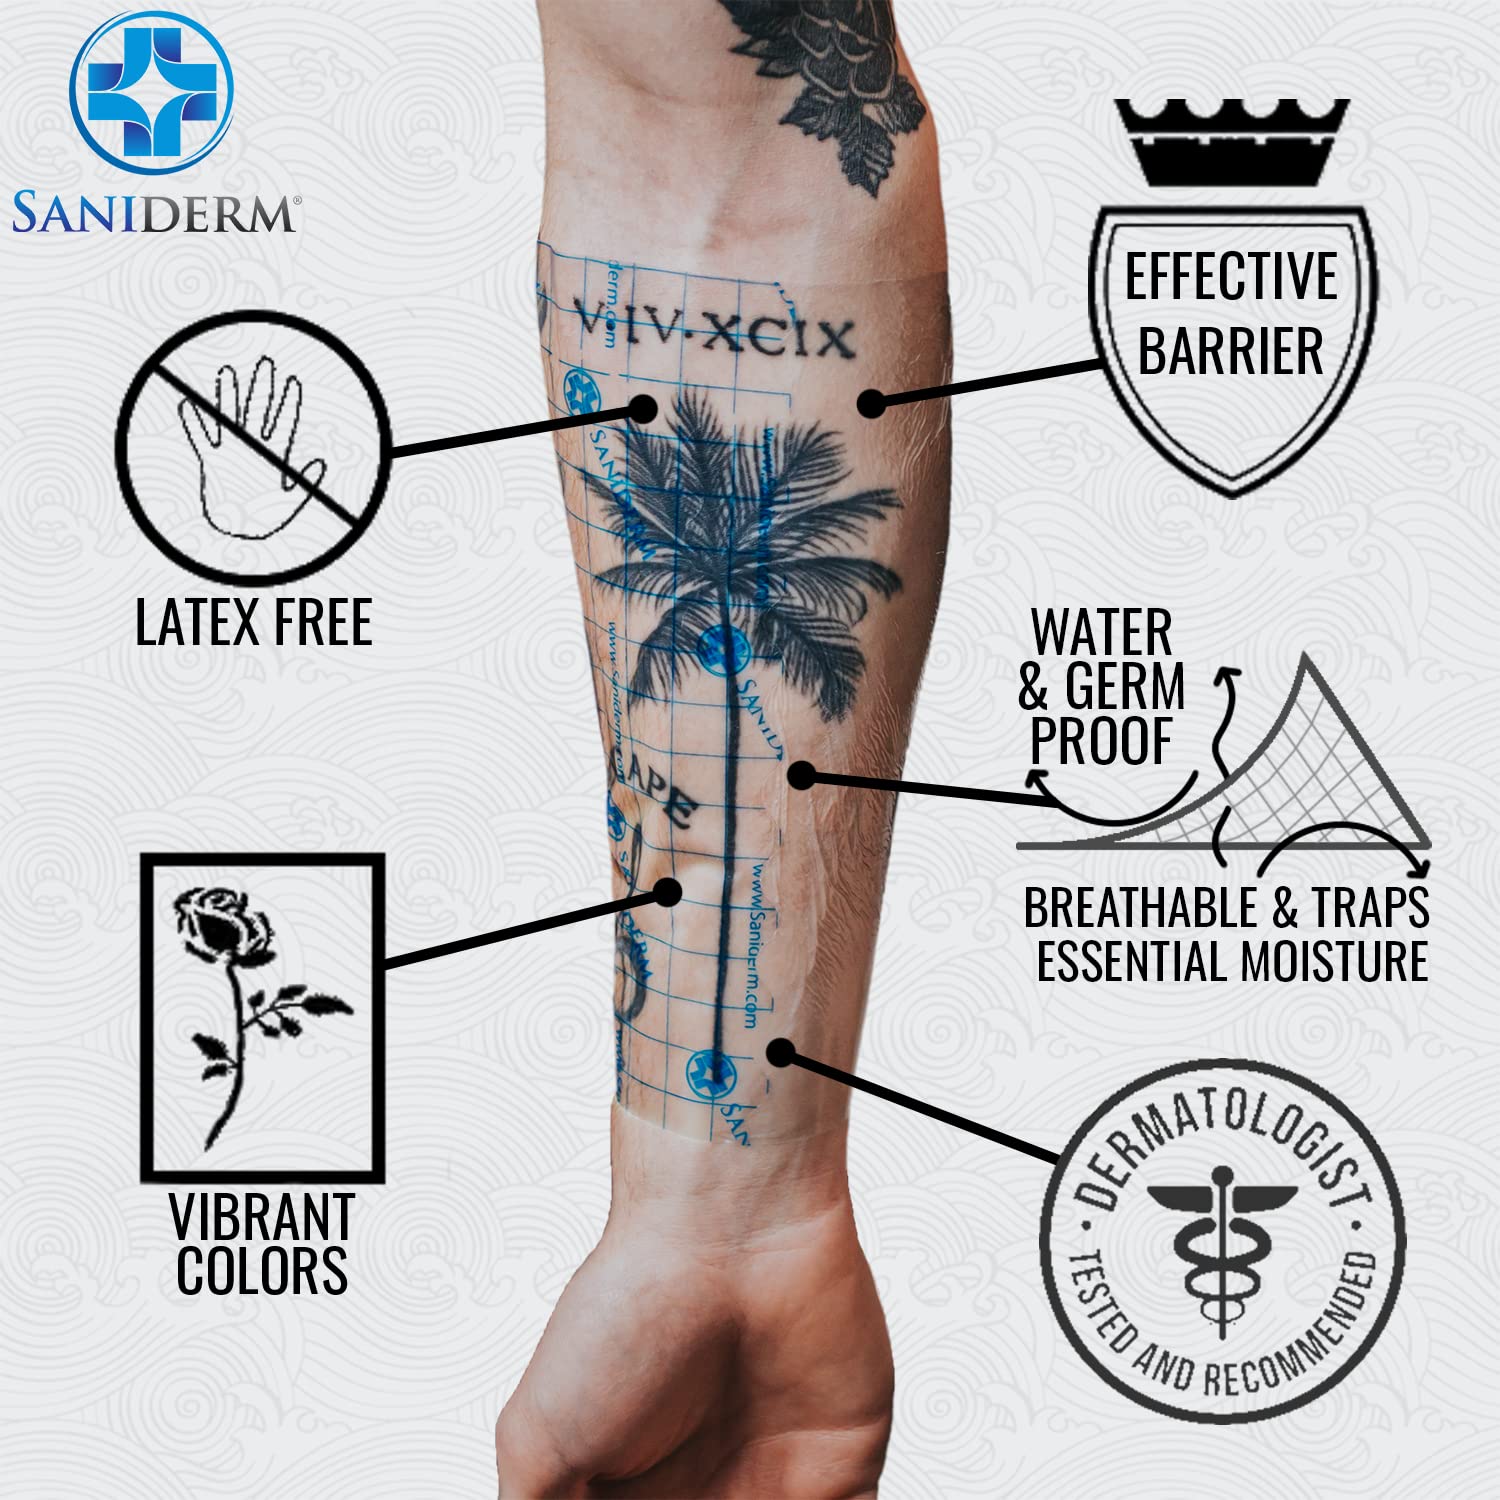 Saniderm Tattoo Aftercare Bandage, Breathable Waterproof Bandages, Sanitary Transparent Adhesive Wraps, Protect and Heal Tattoos, 3 Pre-Cut 8 x 10 Inch Sheets